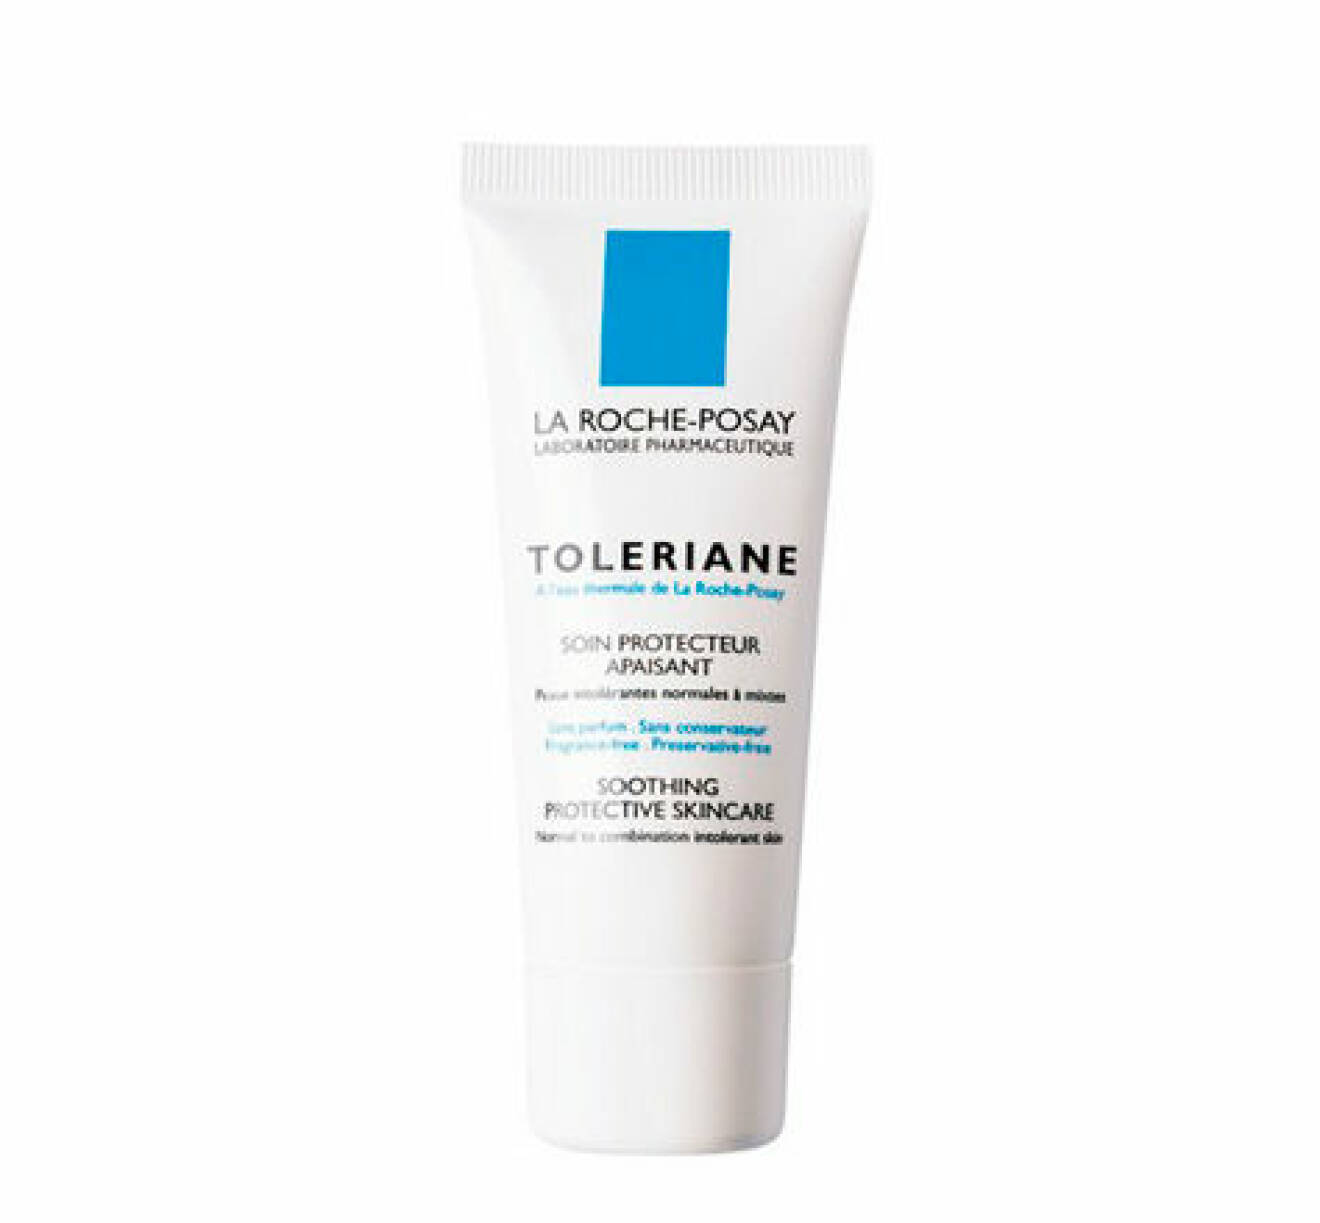 Toleriane Soothing Protective Skincare, ca 149 kr, La Roche-Posay.